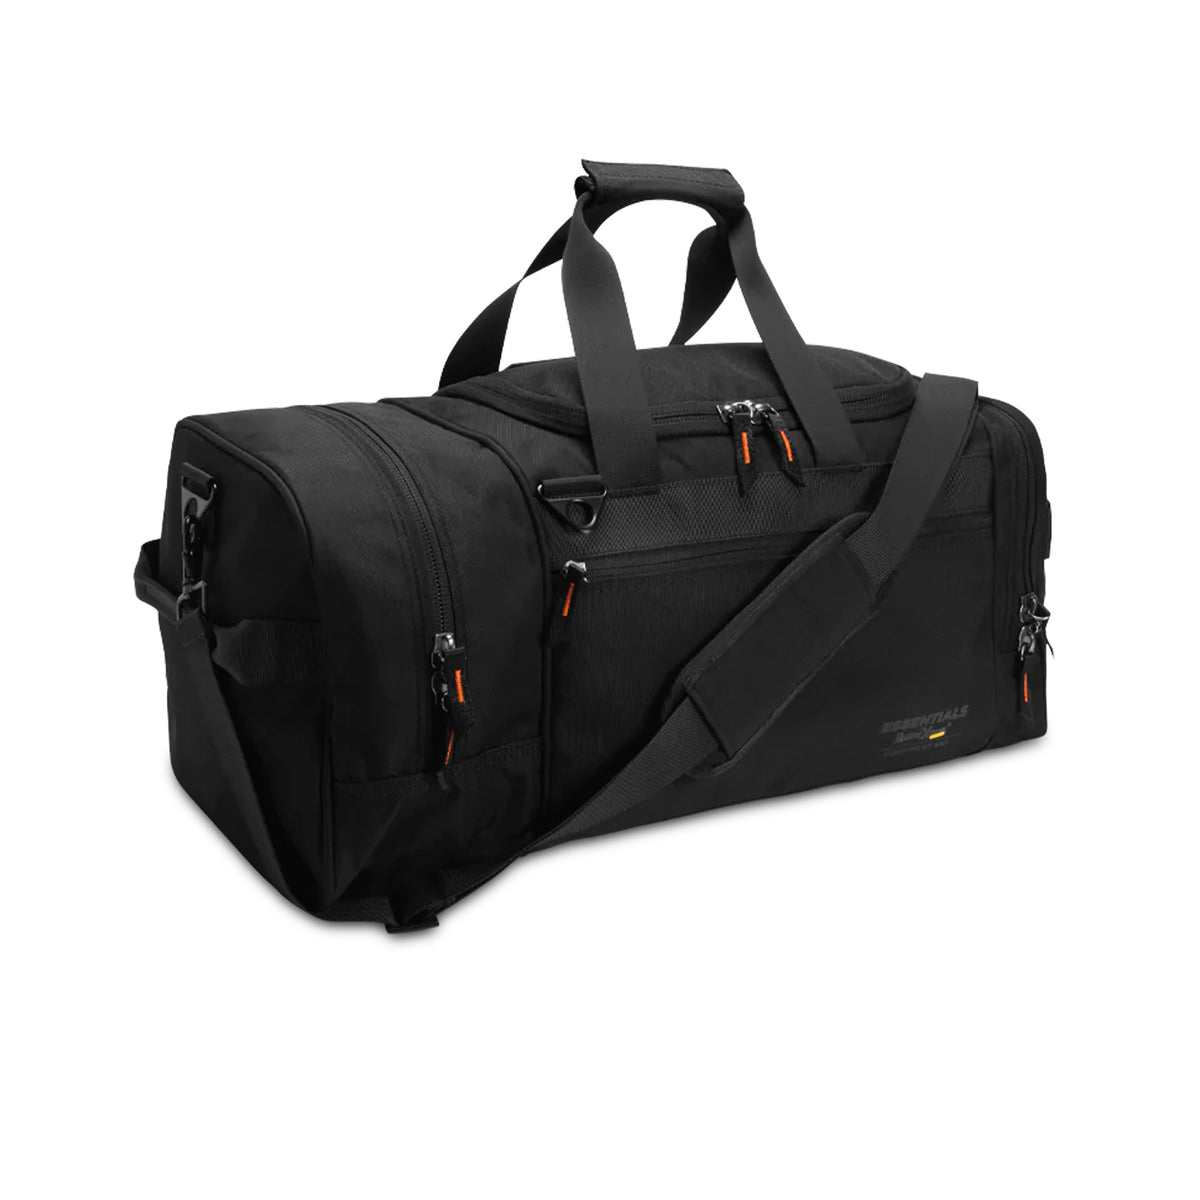 rugged xtremes carry on canvas bag in black